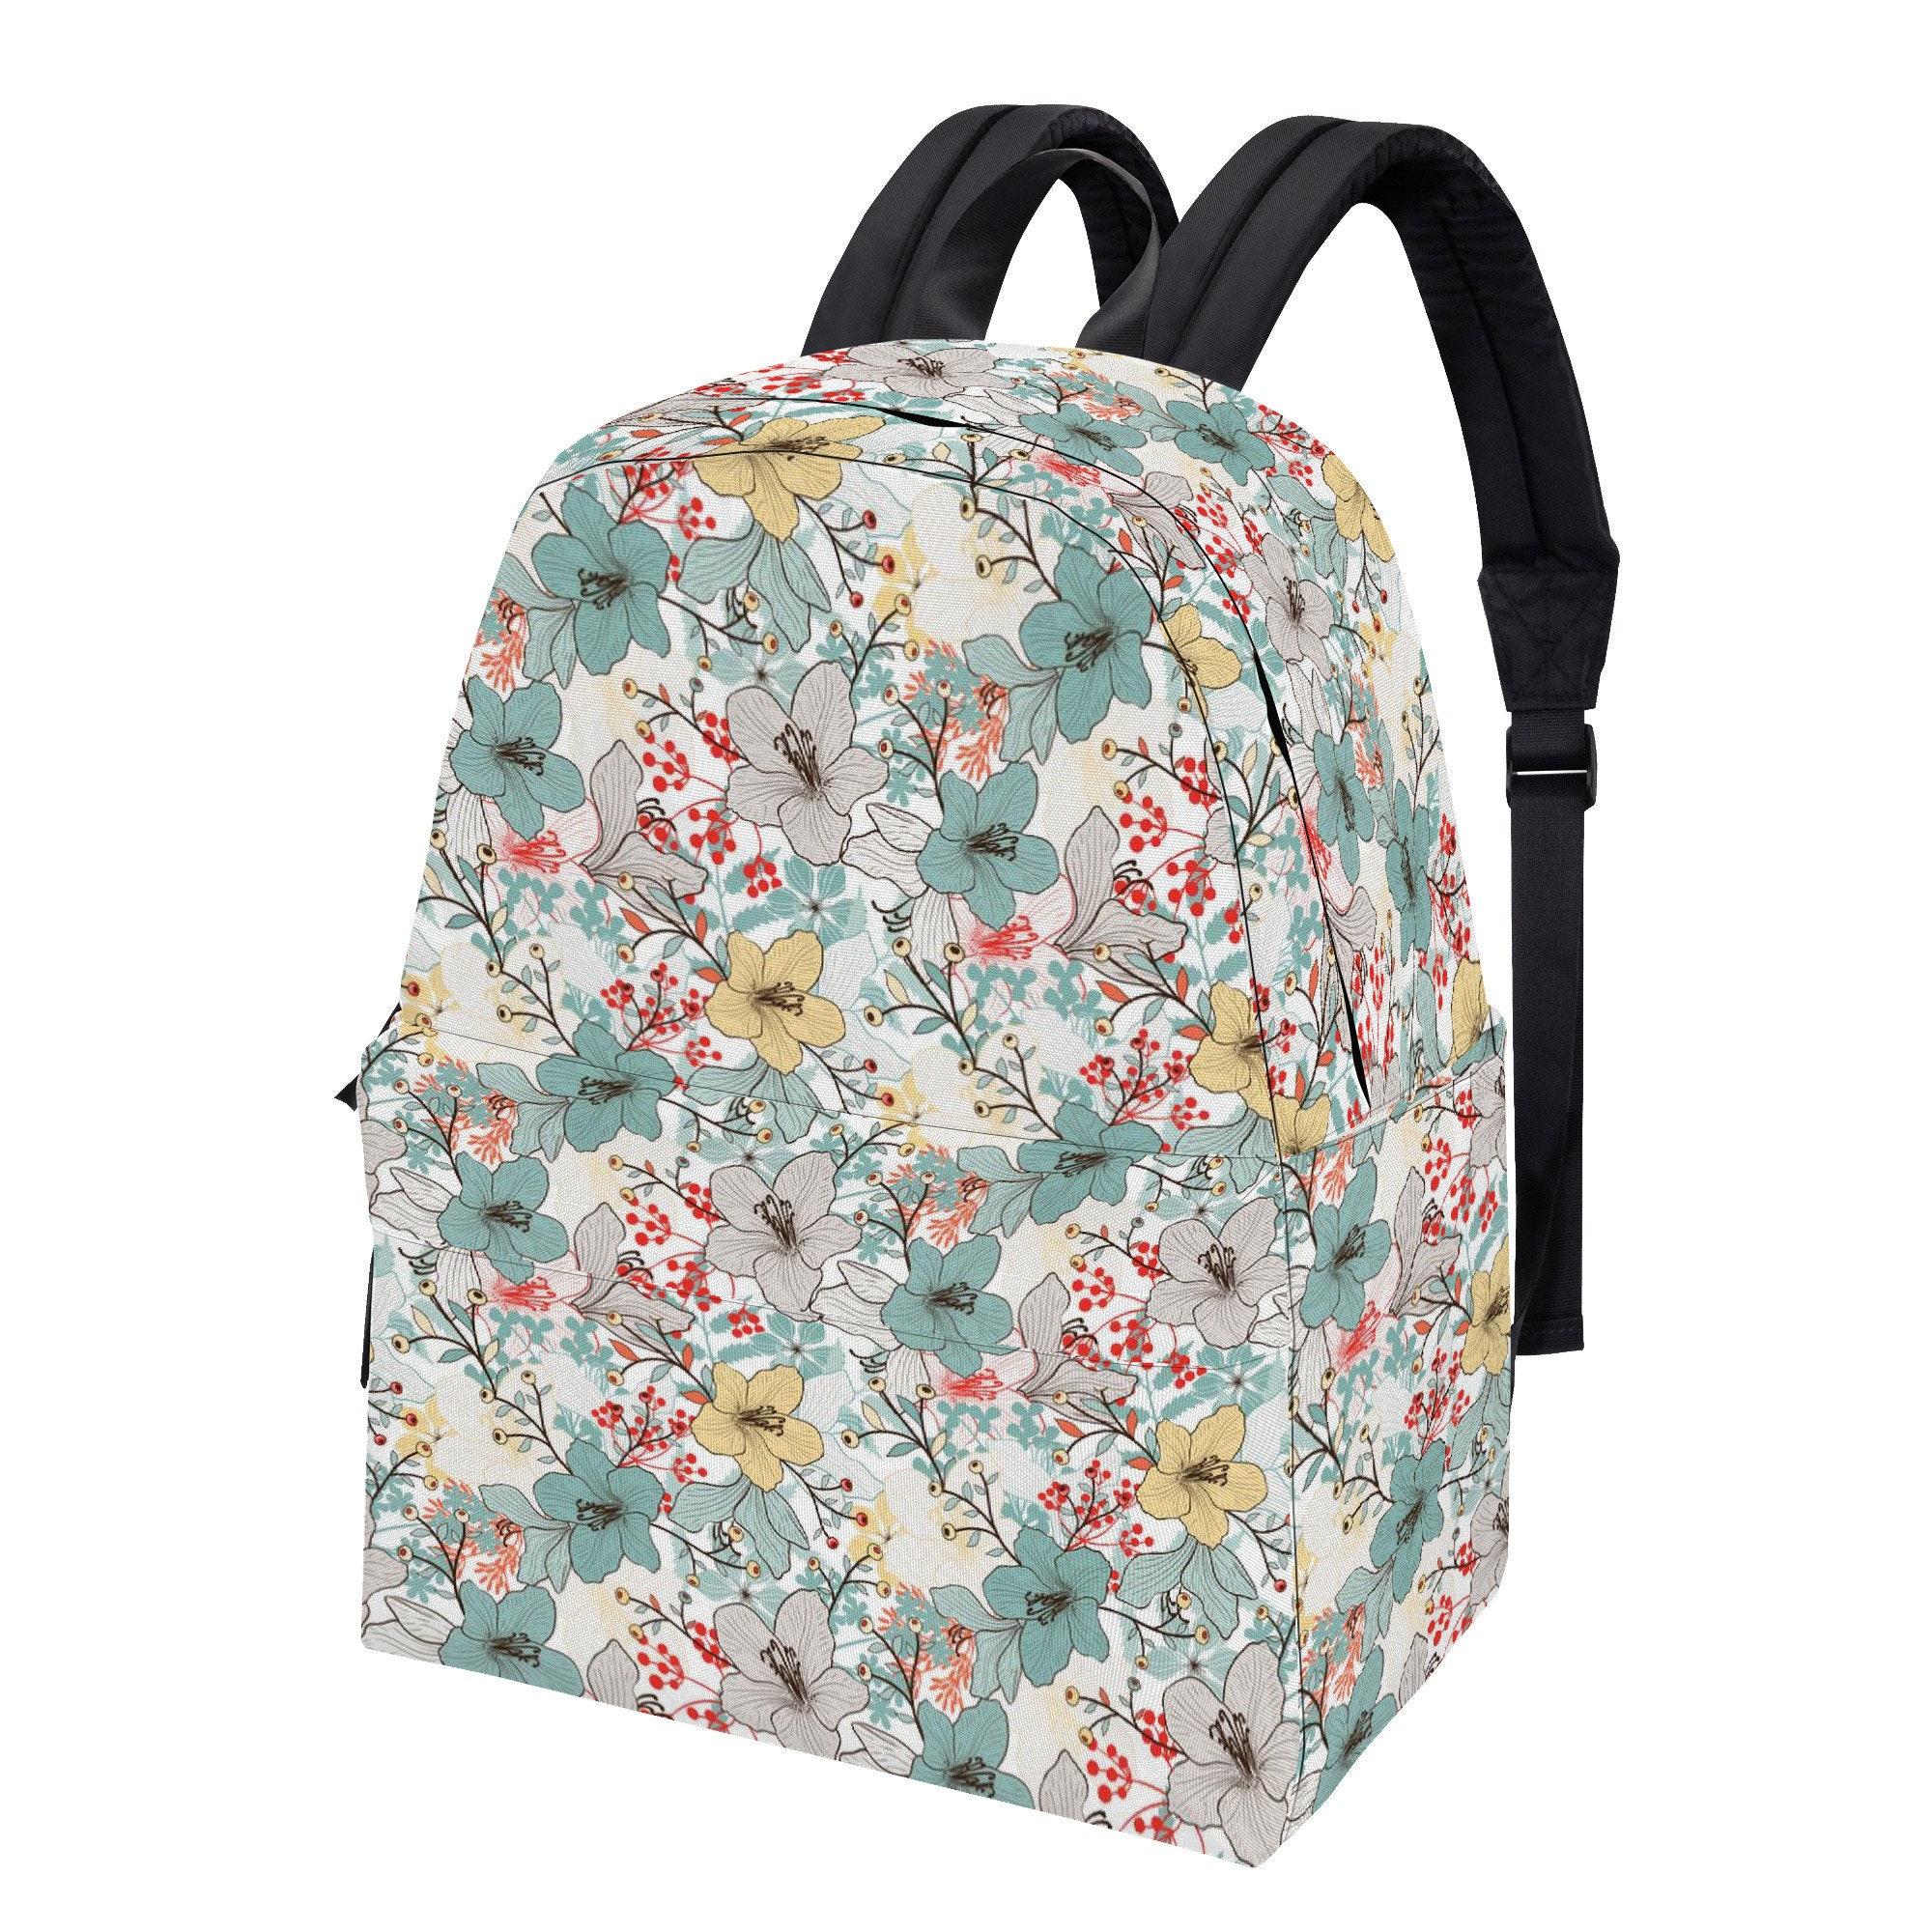 Floral & Letter Graphic Classic Backpack With Bag Charm School Bag